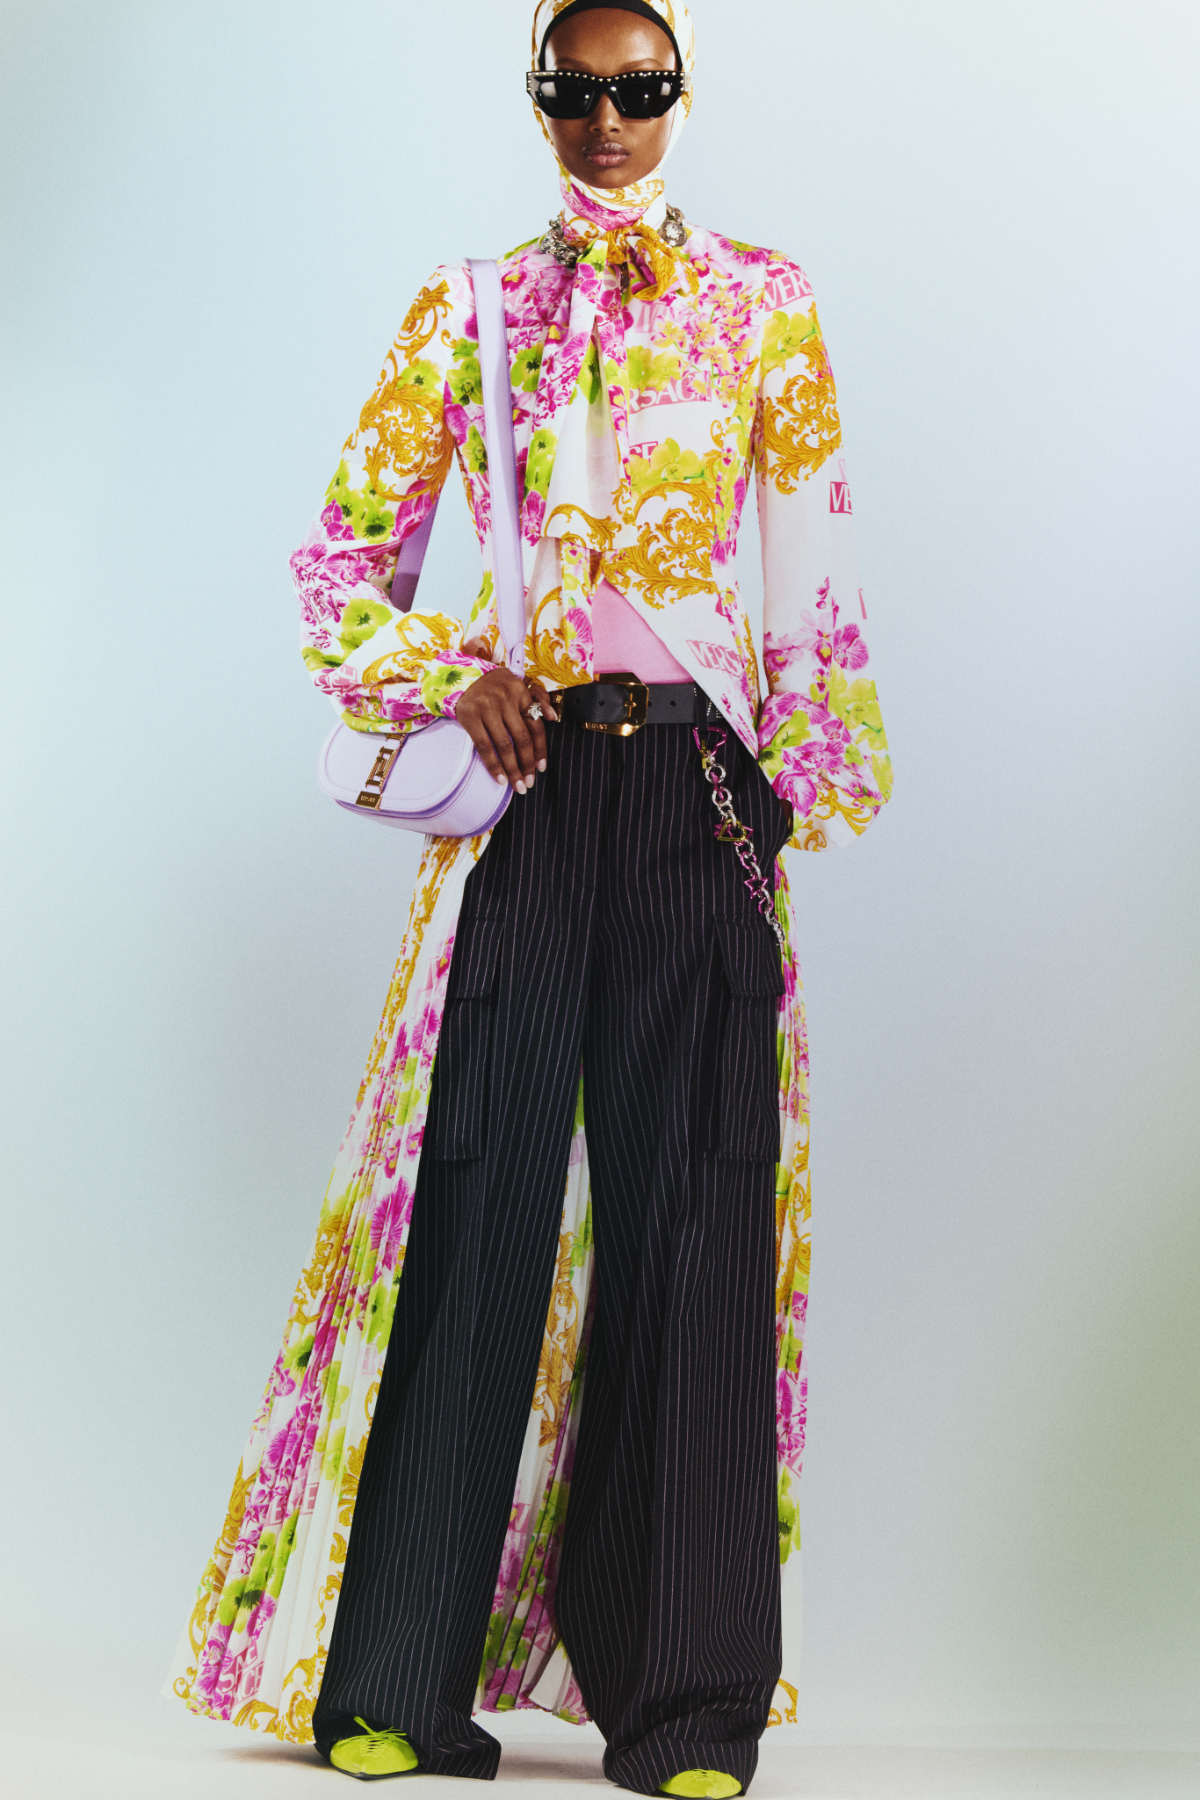 Versace Presents Its New Resort 2023 Collection